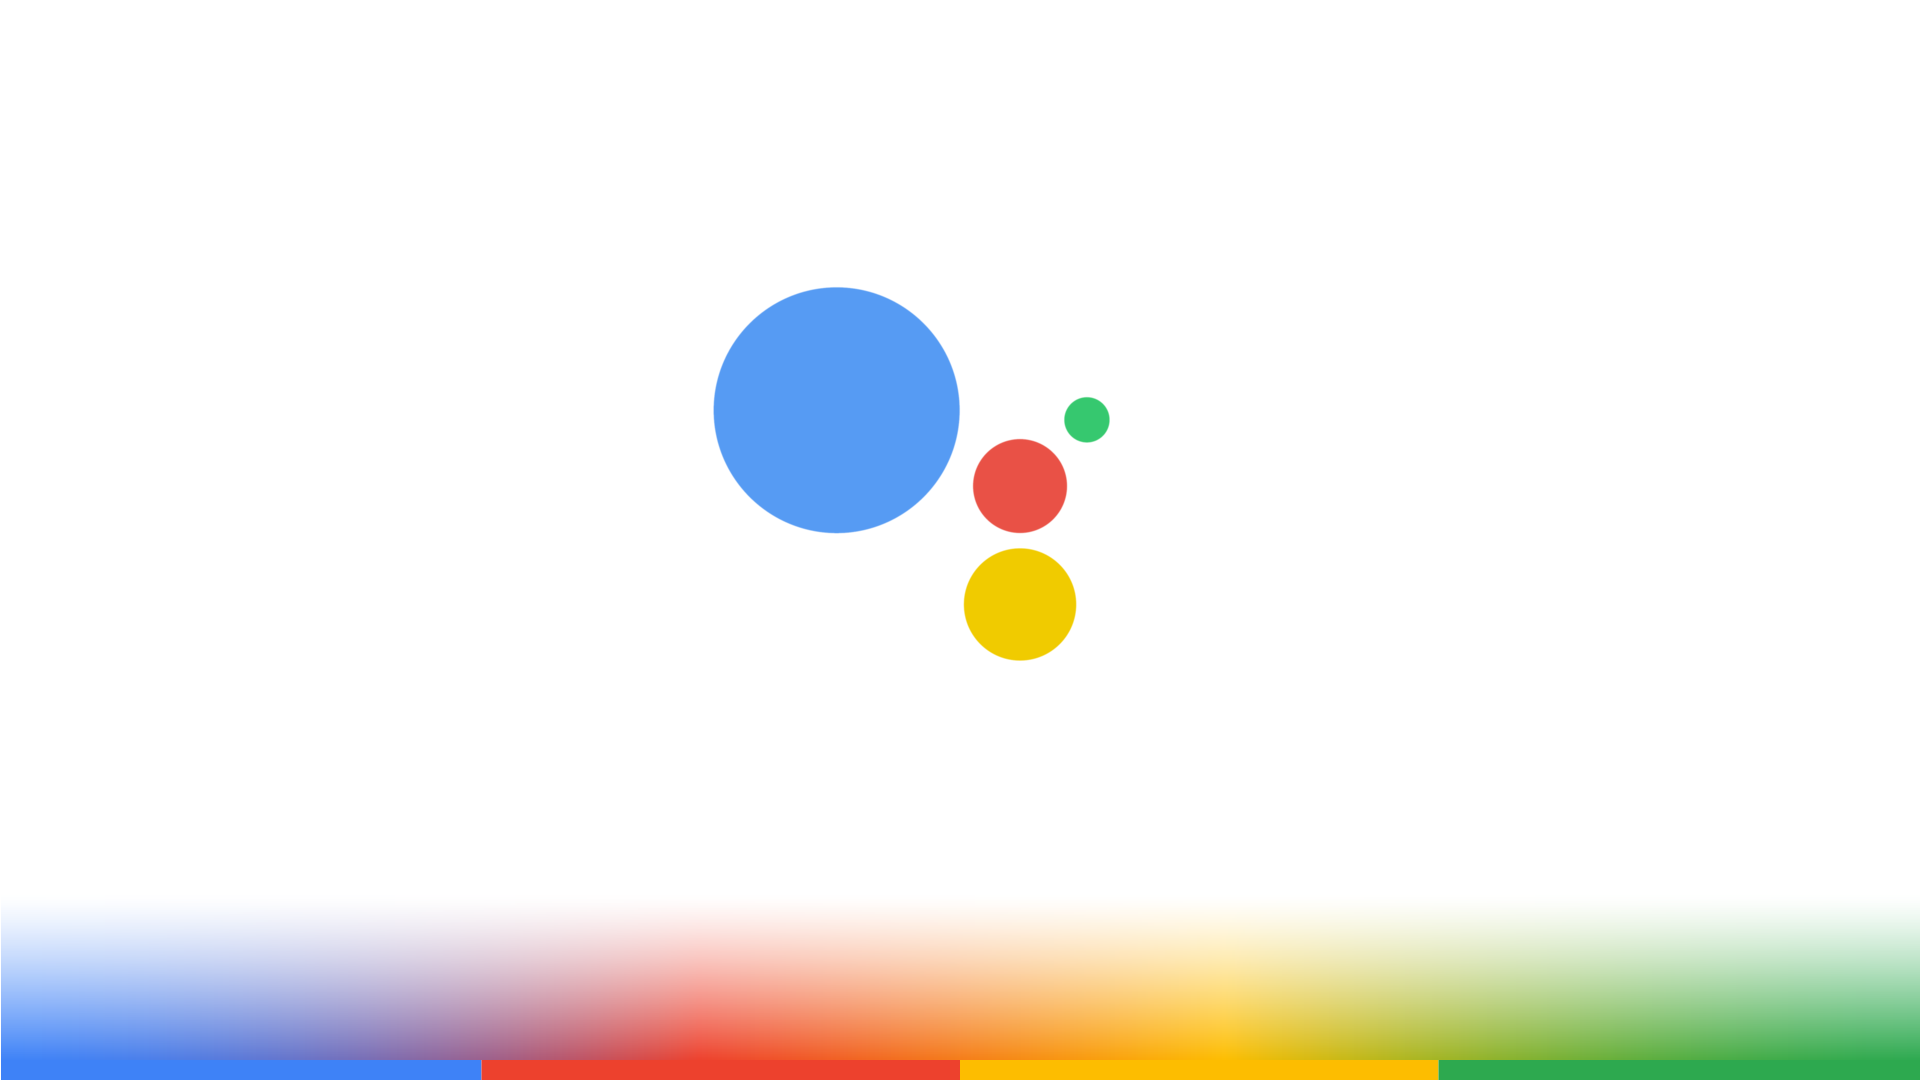 Google Assistant spotted playing dress-up, hinting at Android 12